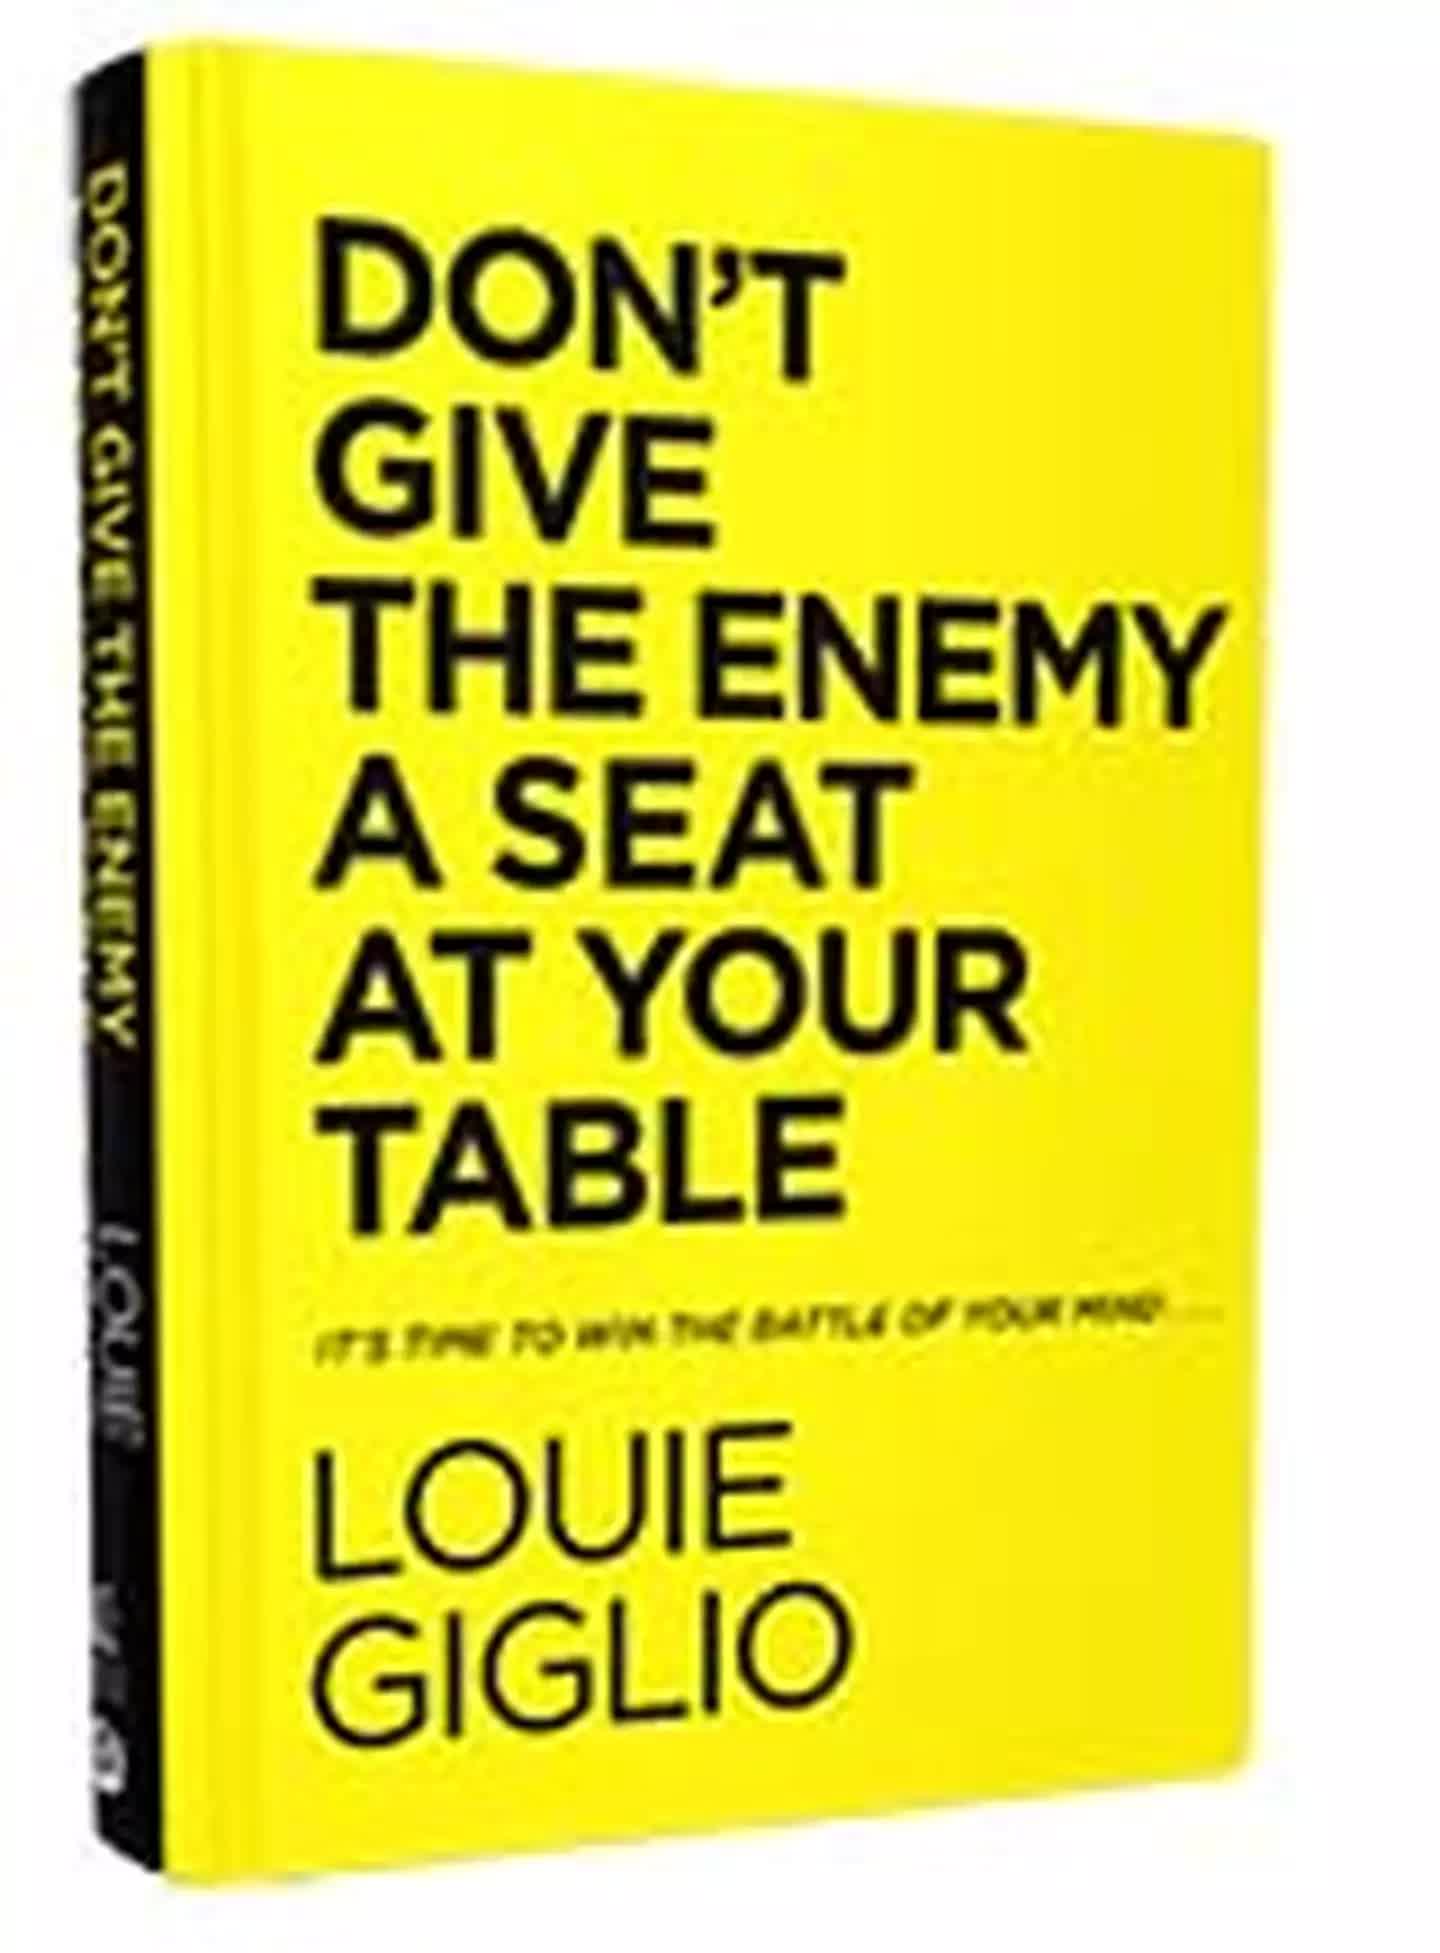 dont give the enemy a seat at your table louie giglio book